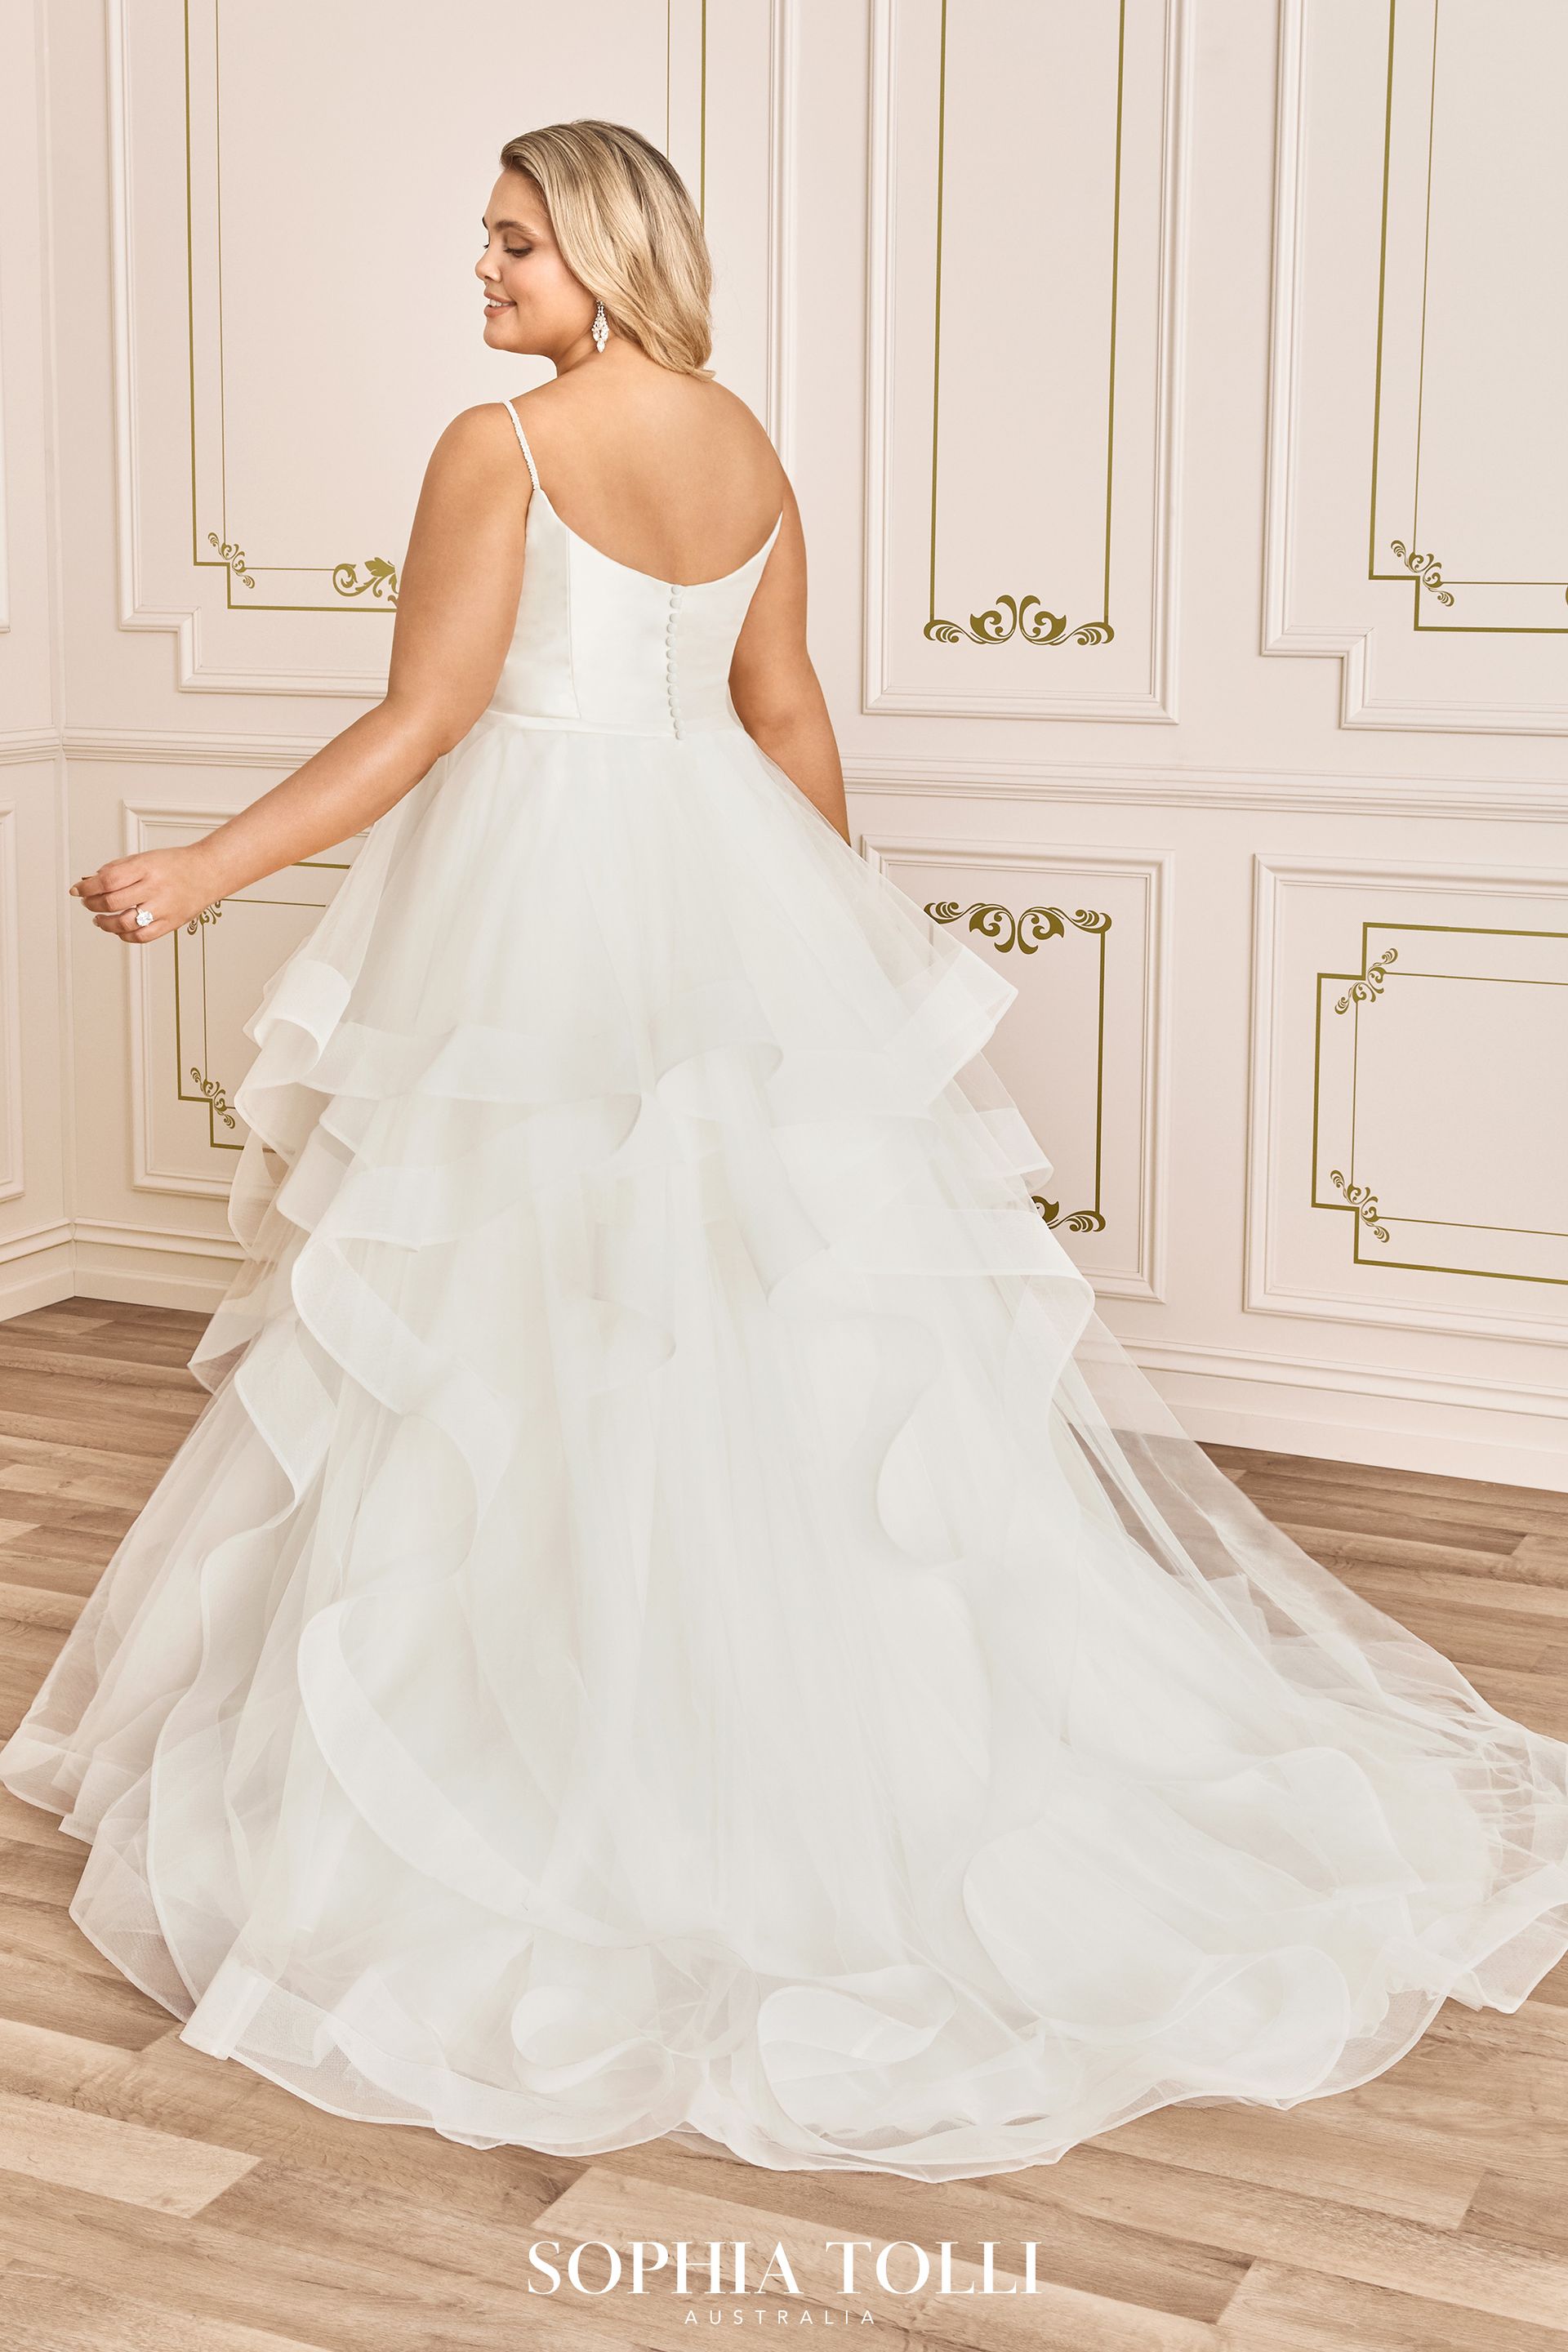 The back of a plus size wedding dress by sophia tolli is shown.